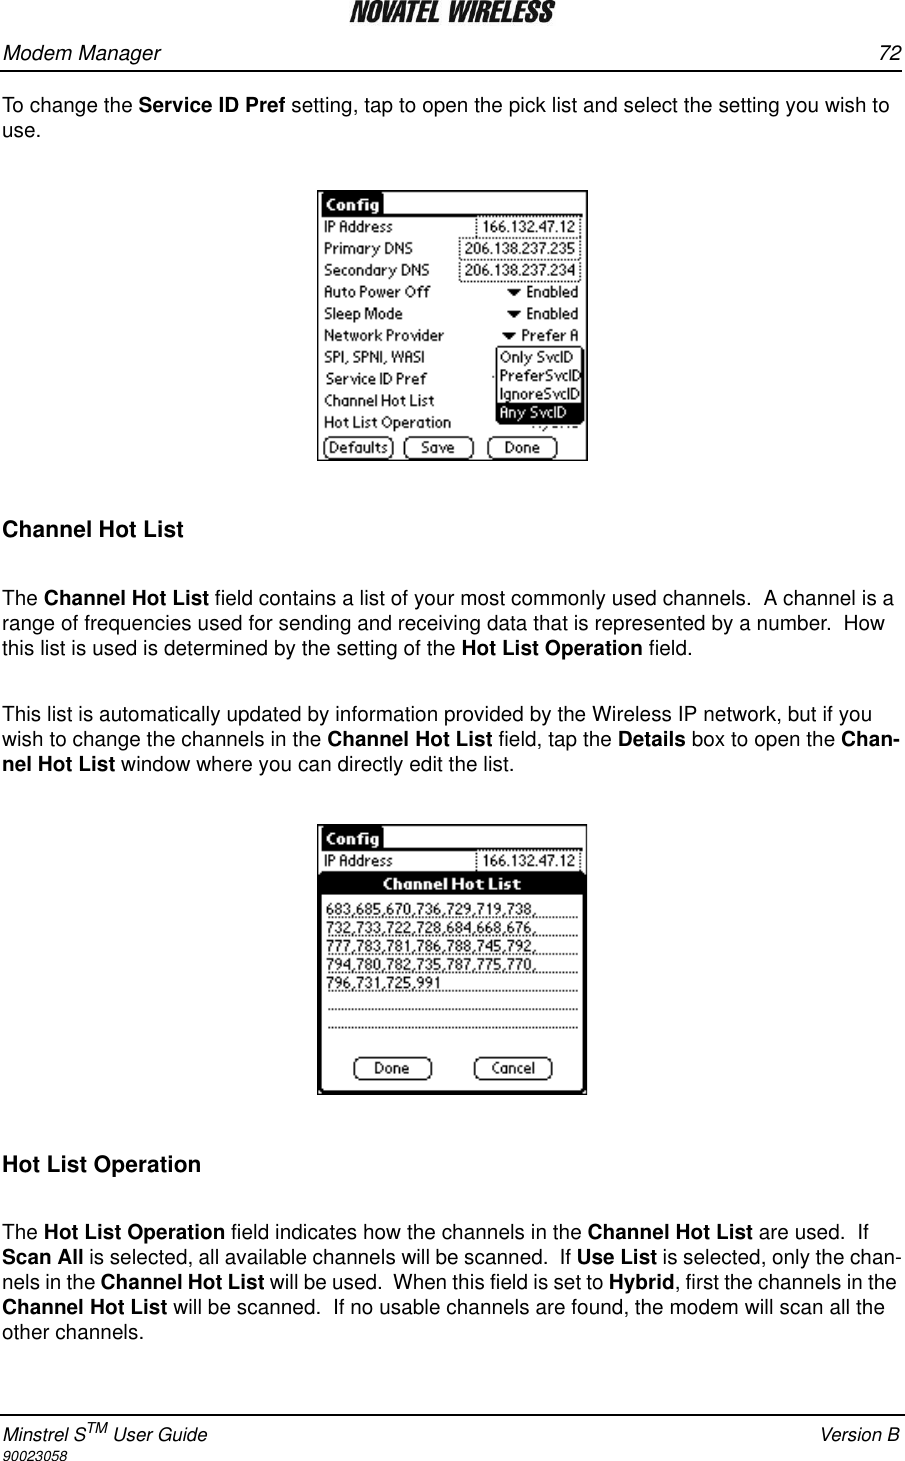 Modem Manager 72Minstrel STM User Guide Version B90023058To change the Service ID Pref setting, tap to open the pick list and select the setting you wish to use. Channel Hot ListThe Channel Hot List field contains a list of your most commonly used channels.  A channel is a range of frequencies used for sending and receiving data that is represented by a number.  How this list is used is determined by the setting of the Hot List Operation field.This list is automatically updated by information provided by the Wireless IP network, but if you wish to change the channels in the Channel Hot List field, tap the Details box to open the Chan-nel Hot List window where you can directly edit the list.Hot List OperationThe Hot List Operation field indicates how the channels in the Channel Hot List are used.  If Scan All is selected, all available channels will be scanned.  If Use List is selected, only the chan-nels in the Channel Hot List will be used.  When this field is set to Hybrid, first the channels in the Channel Hot List will be scanned.  If no usable channels are found, the modem will scan all the other channels.